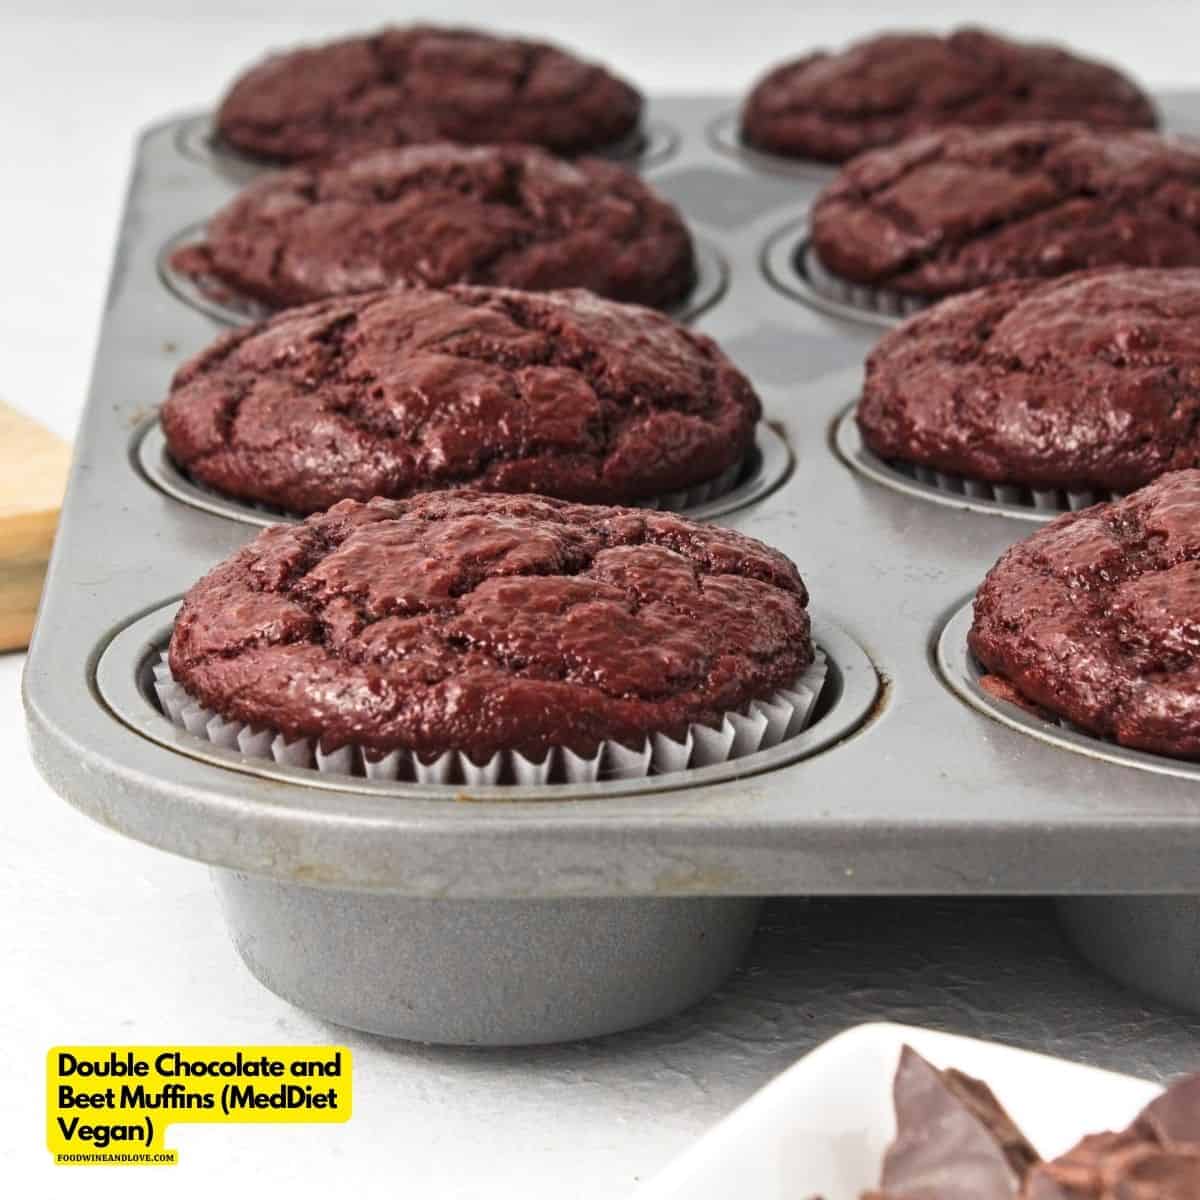 Double Chocolate and Beet Muffins- a delicious recipe for double chocolate muffins that are made with beets. Vegan, Mediterranean diet 